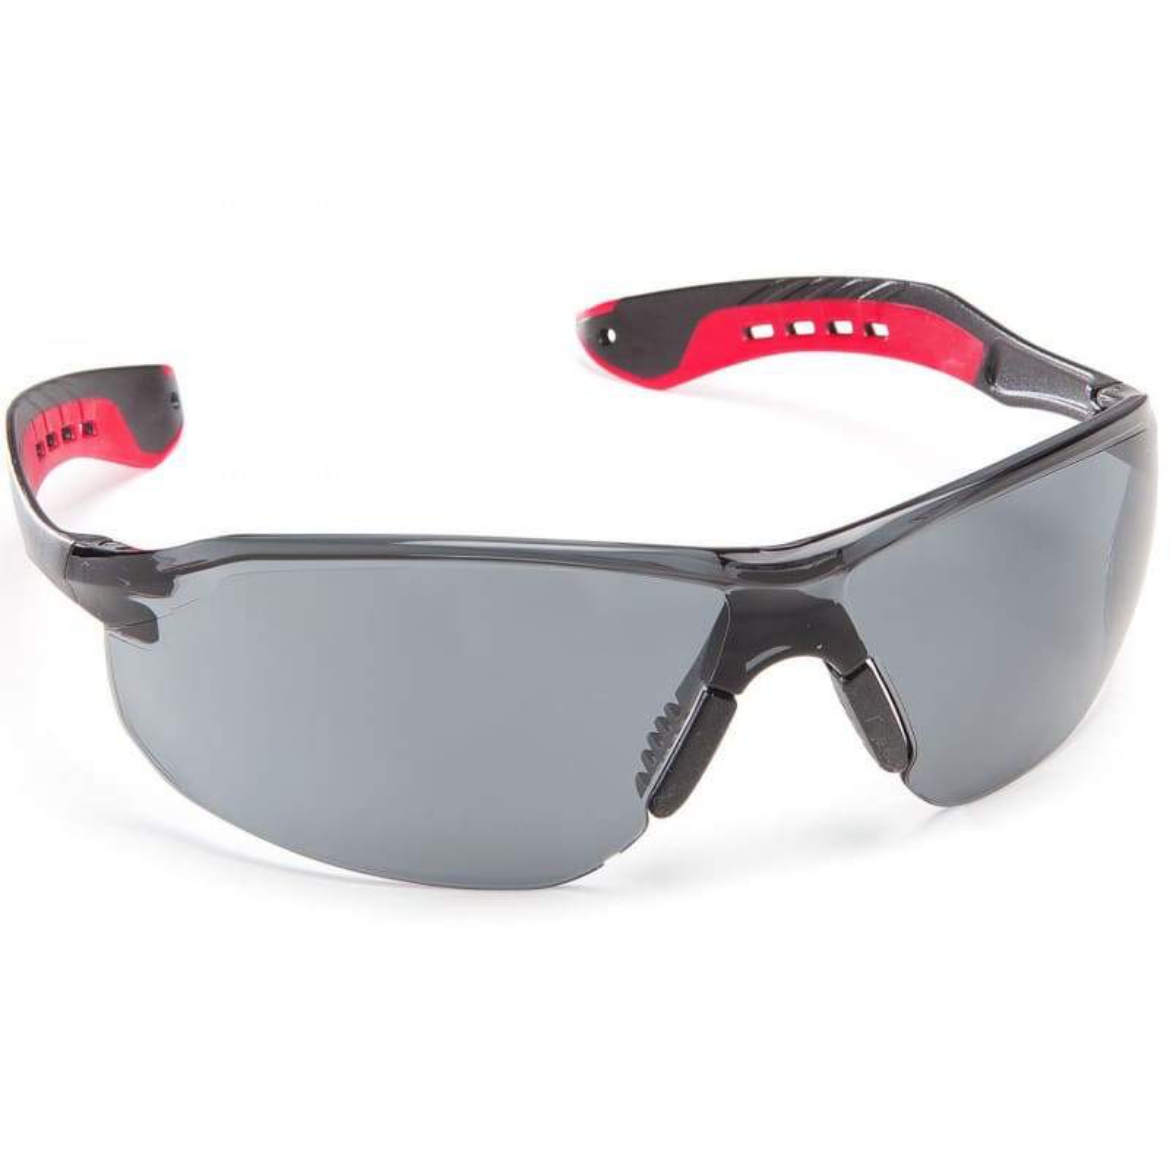 Picture of Force360 Glide Smoke Lens Safety Glasses